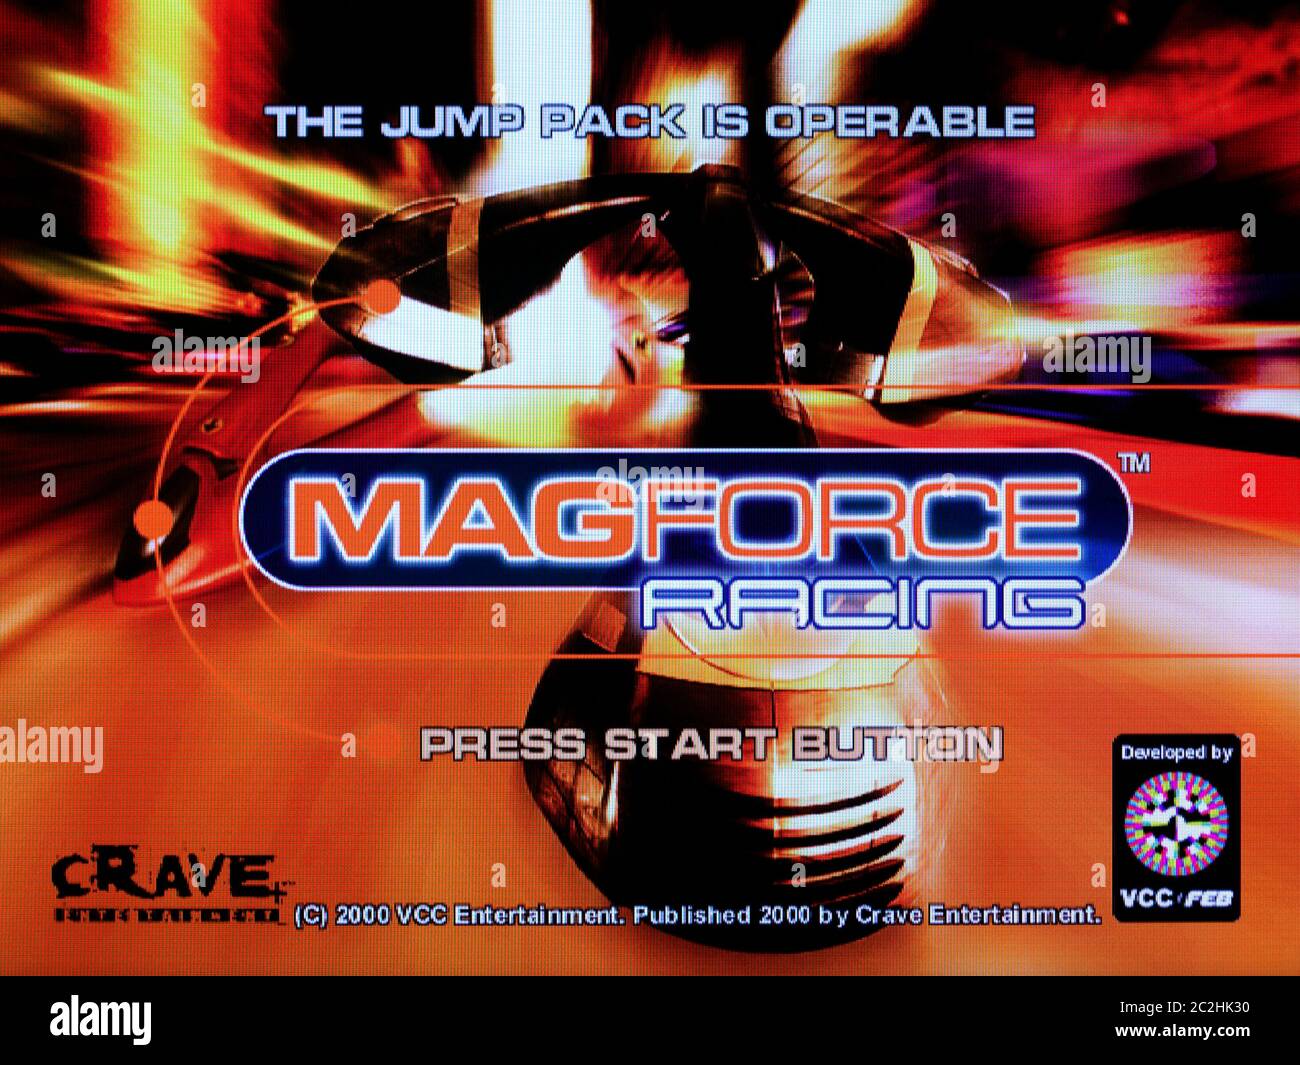 Magforce Racing - Sega Dreamcast Videogame - Editorial use only Stock Photo